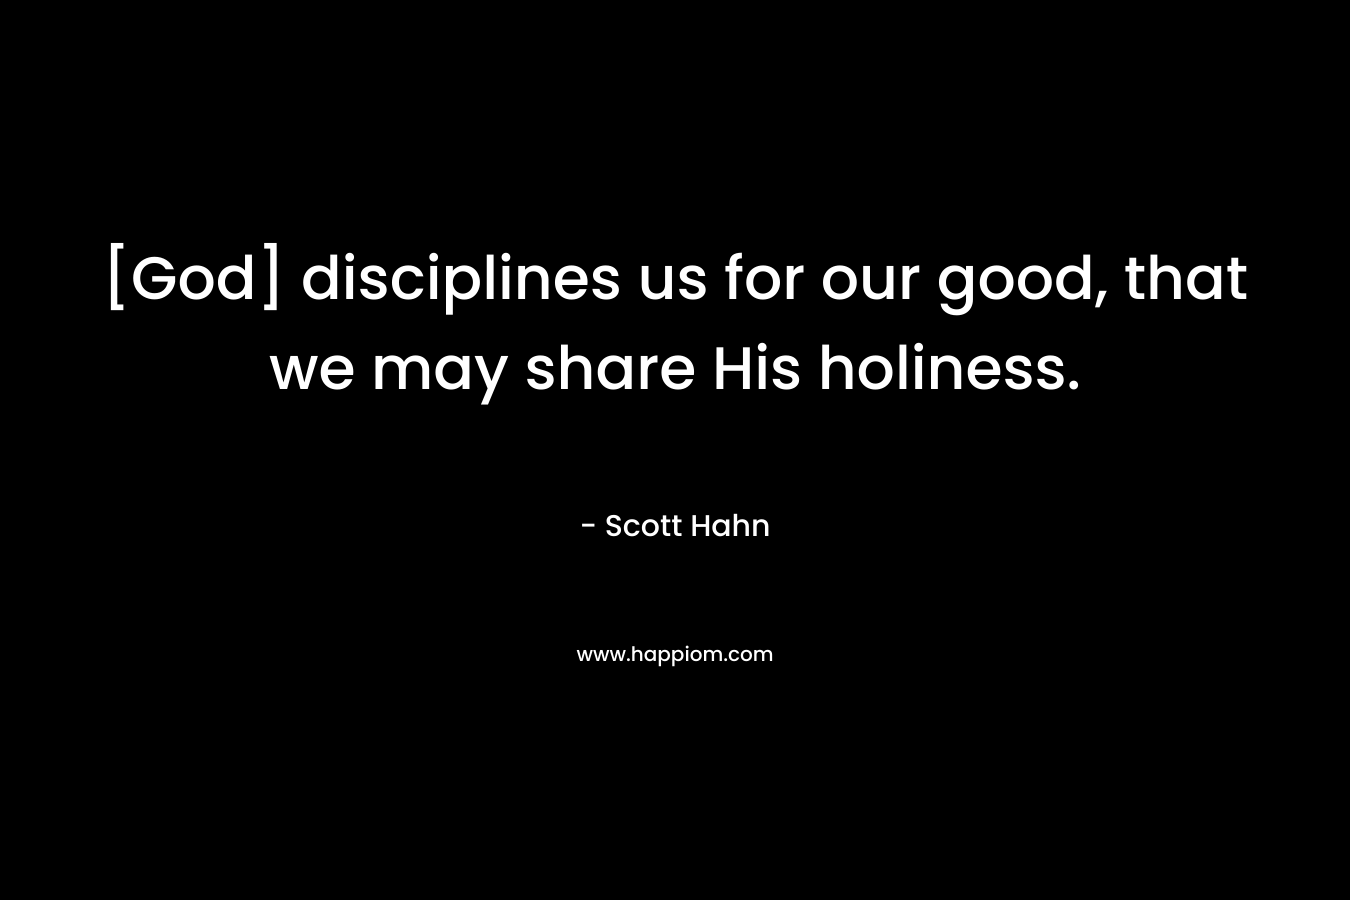 [God] disciplines us for our good, that we may share His holiness.